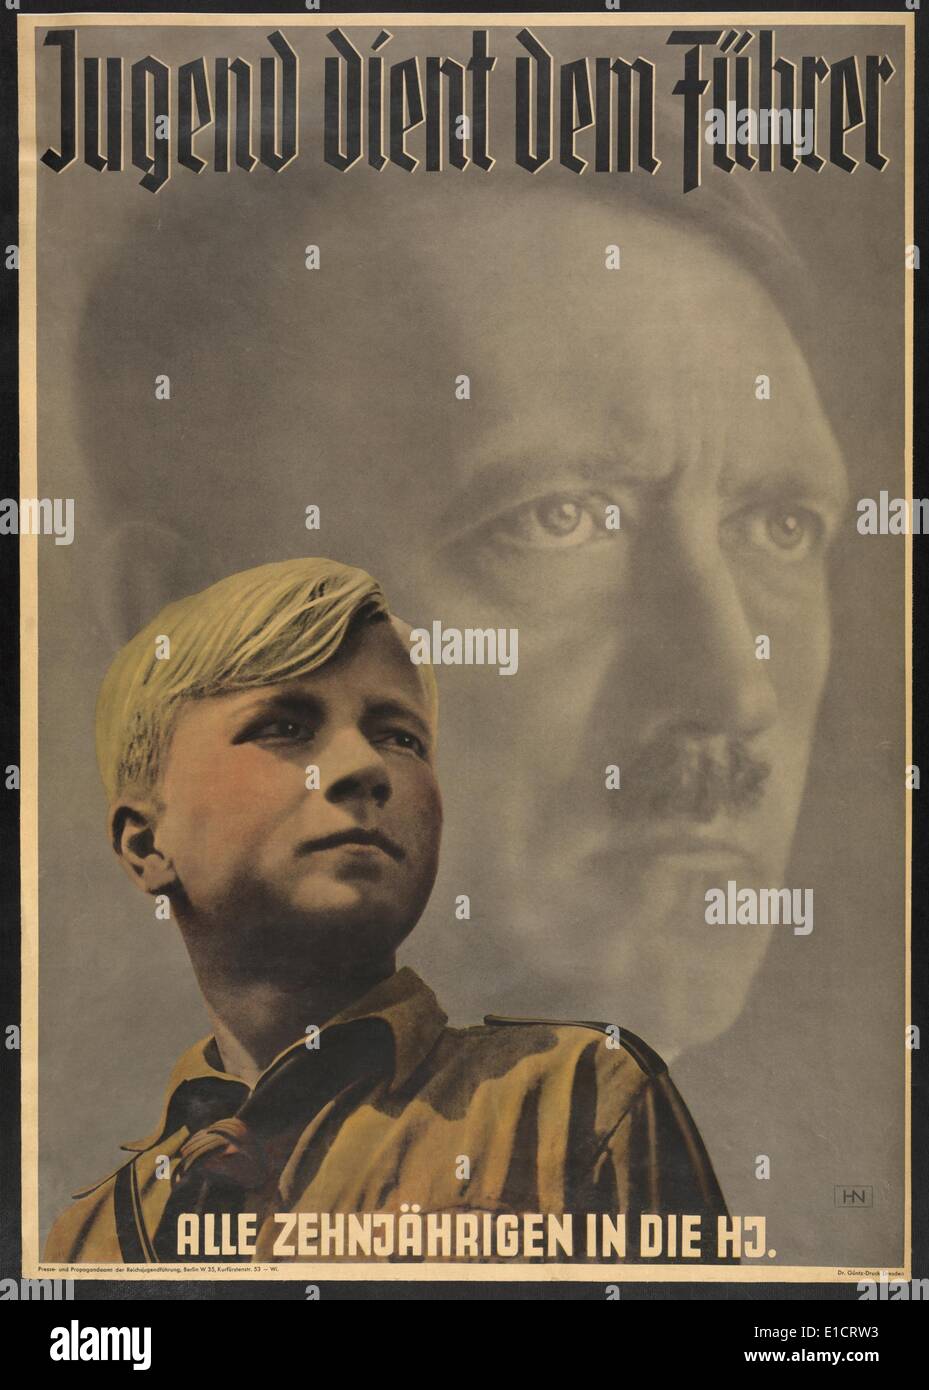 'Youth serves the leader - all ten year-olds into the Hitler Youth'. Poster shows German boy wearing Hitler Youth uniform, with Stock Photo